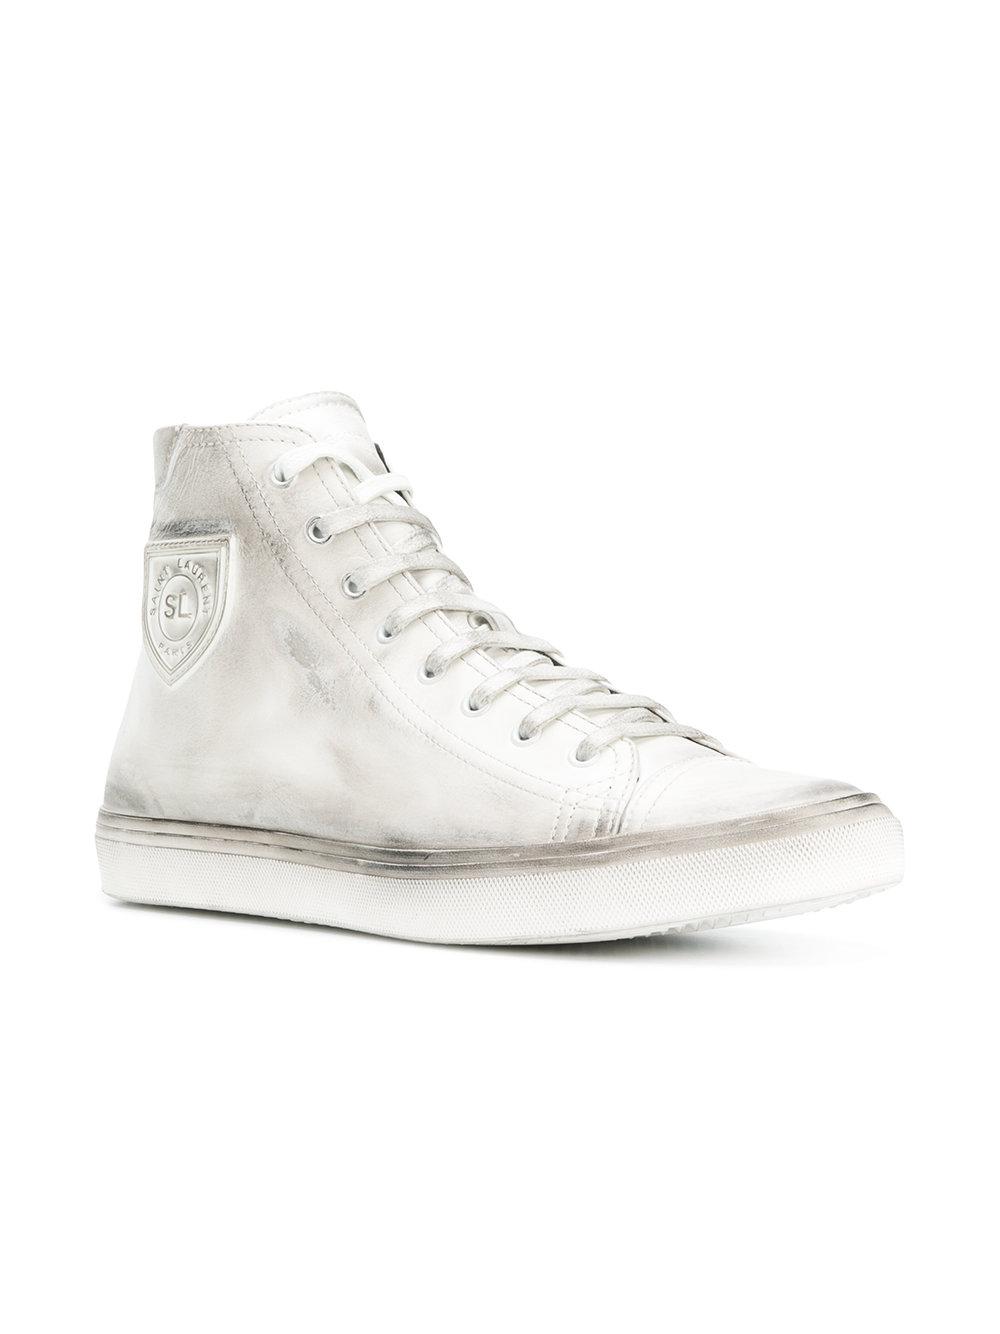 Saint Laurent Leather Bedford Hi-top Sneakers in White for Men - Lyst